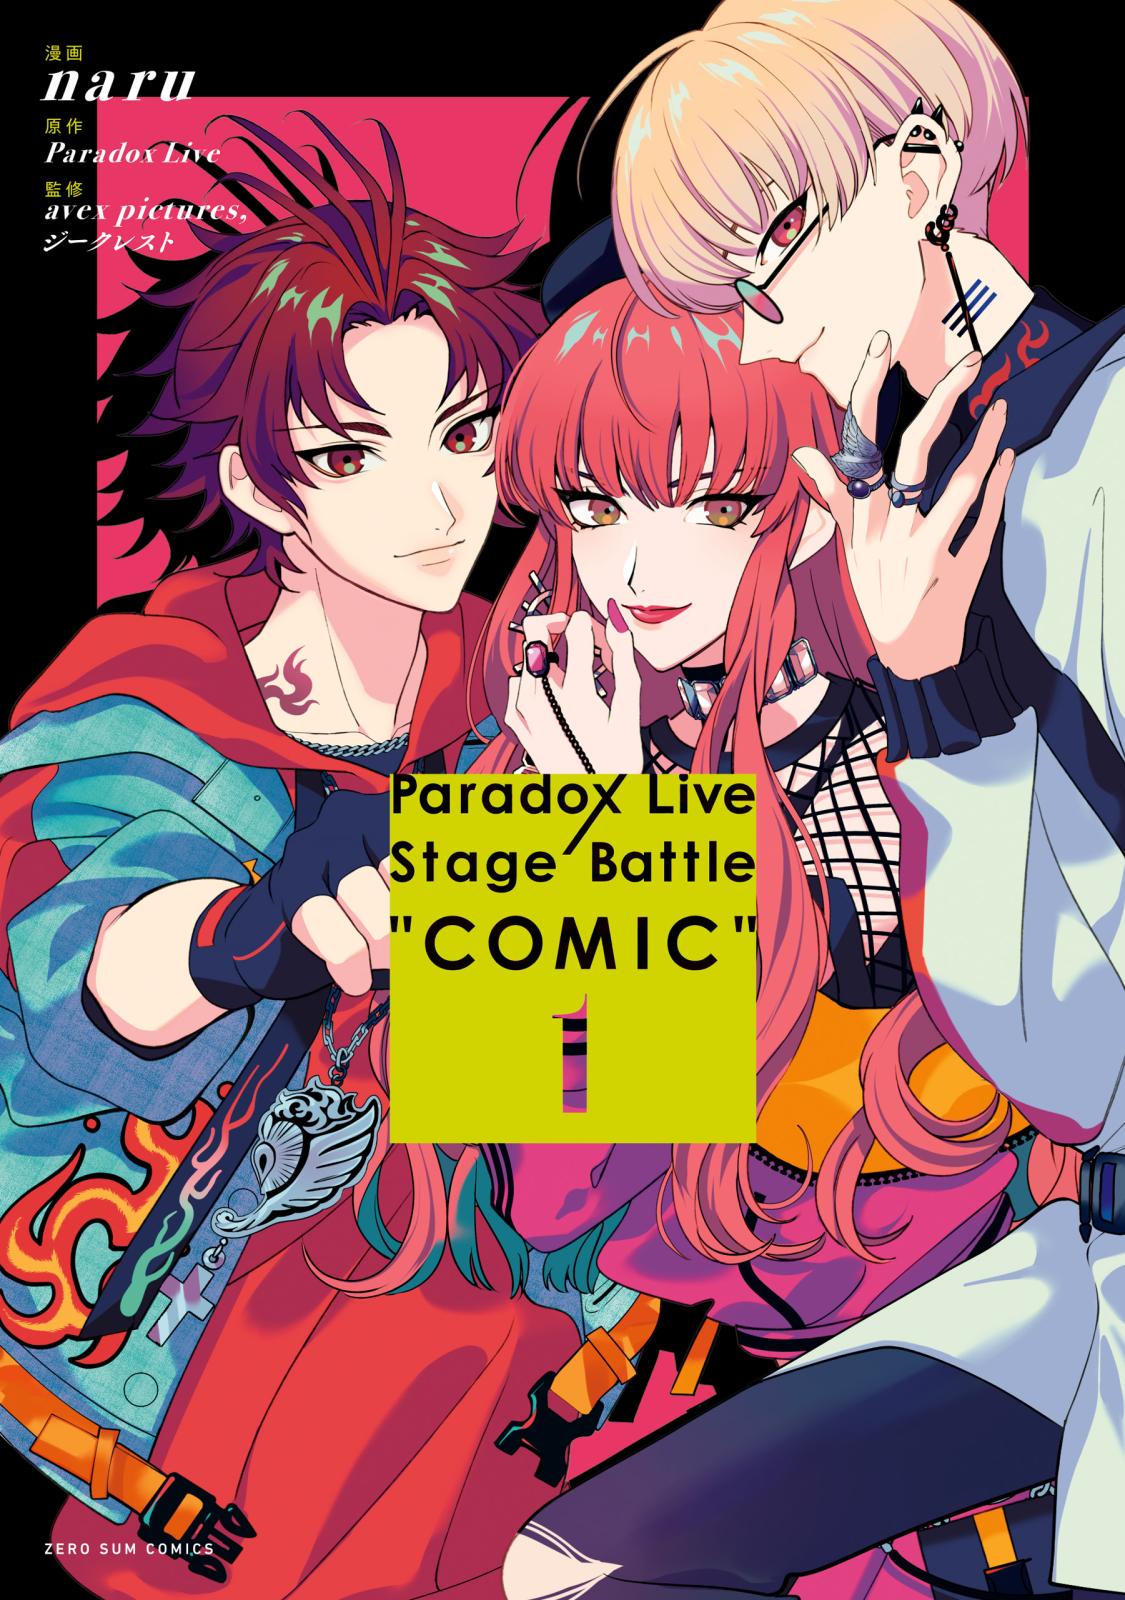 Paradox Live Stage Battle “COMIC”（１）【電子限定描き下ろしイラスト付き】